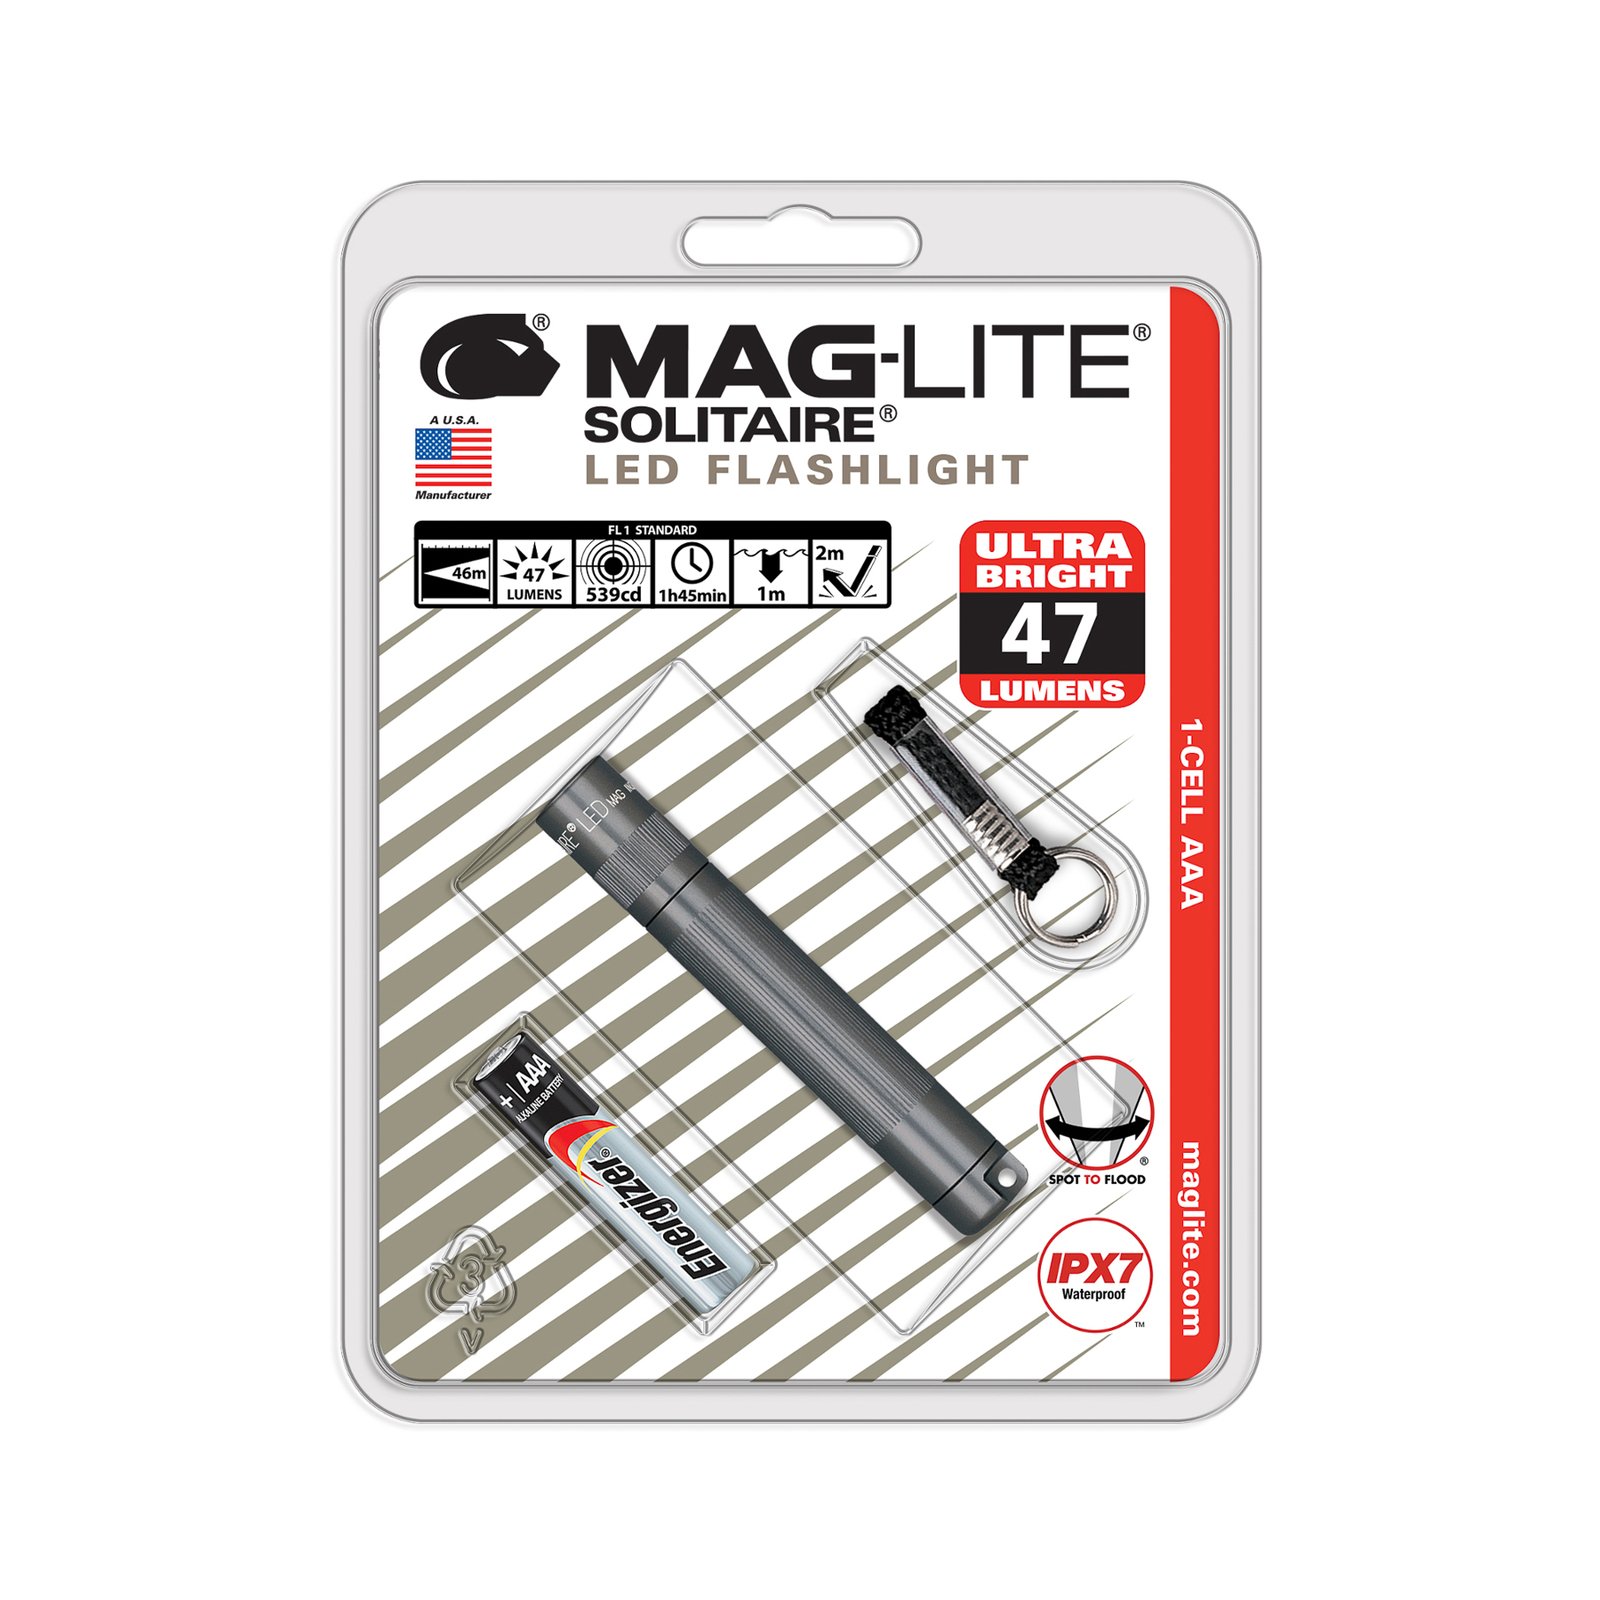 Maglite LED-Taschenlampe Solitaire, 1-Cell AAA, grau